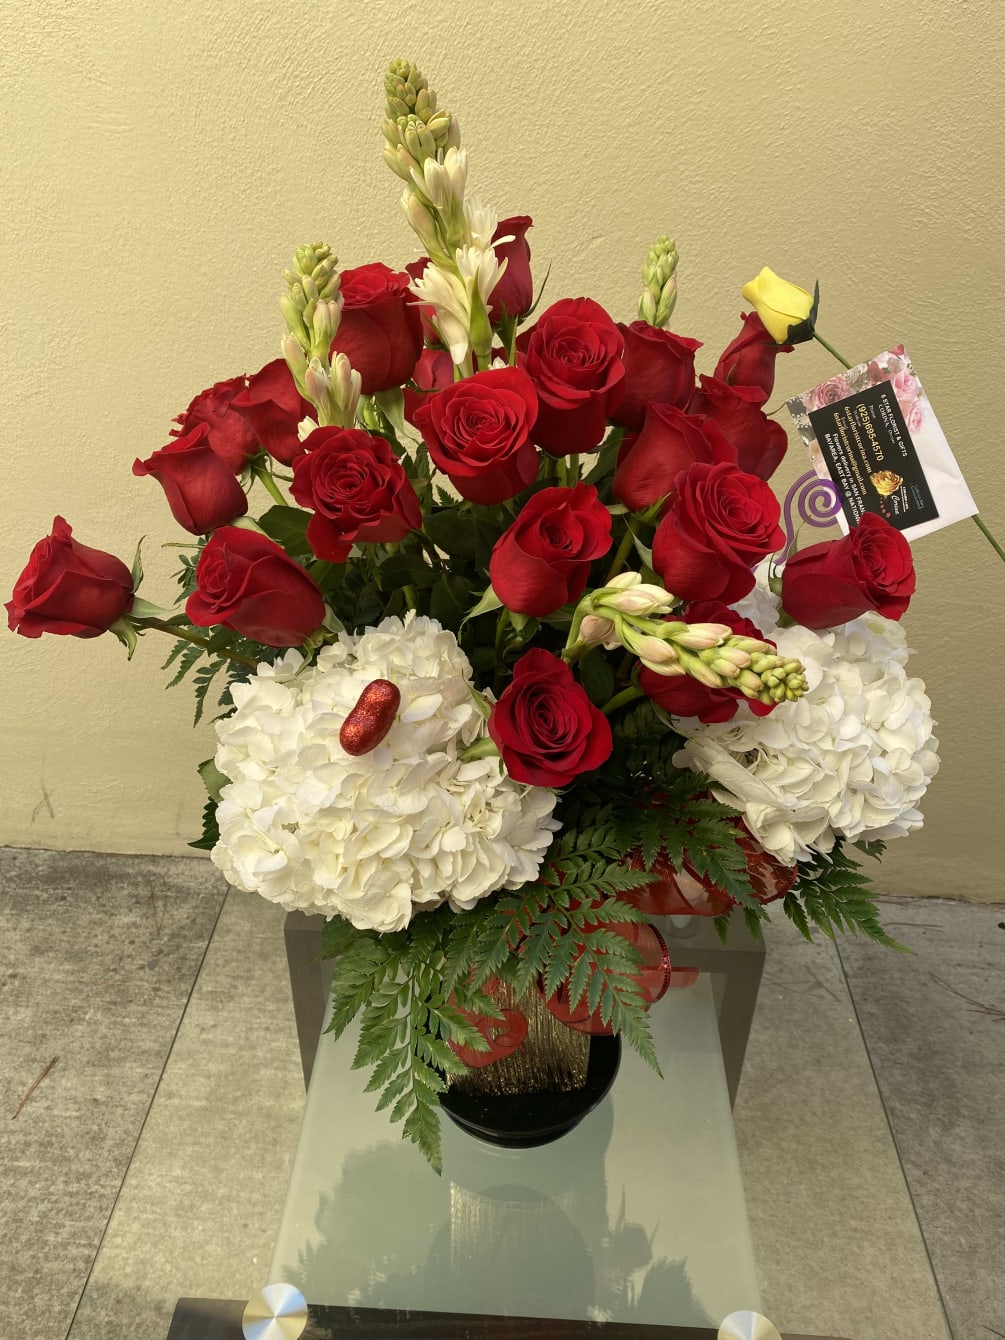 Adriana - 25 Gorgeous Premium Red Roses

 These come in a stunning